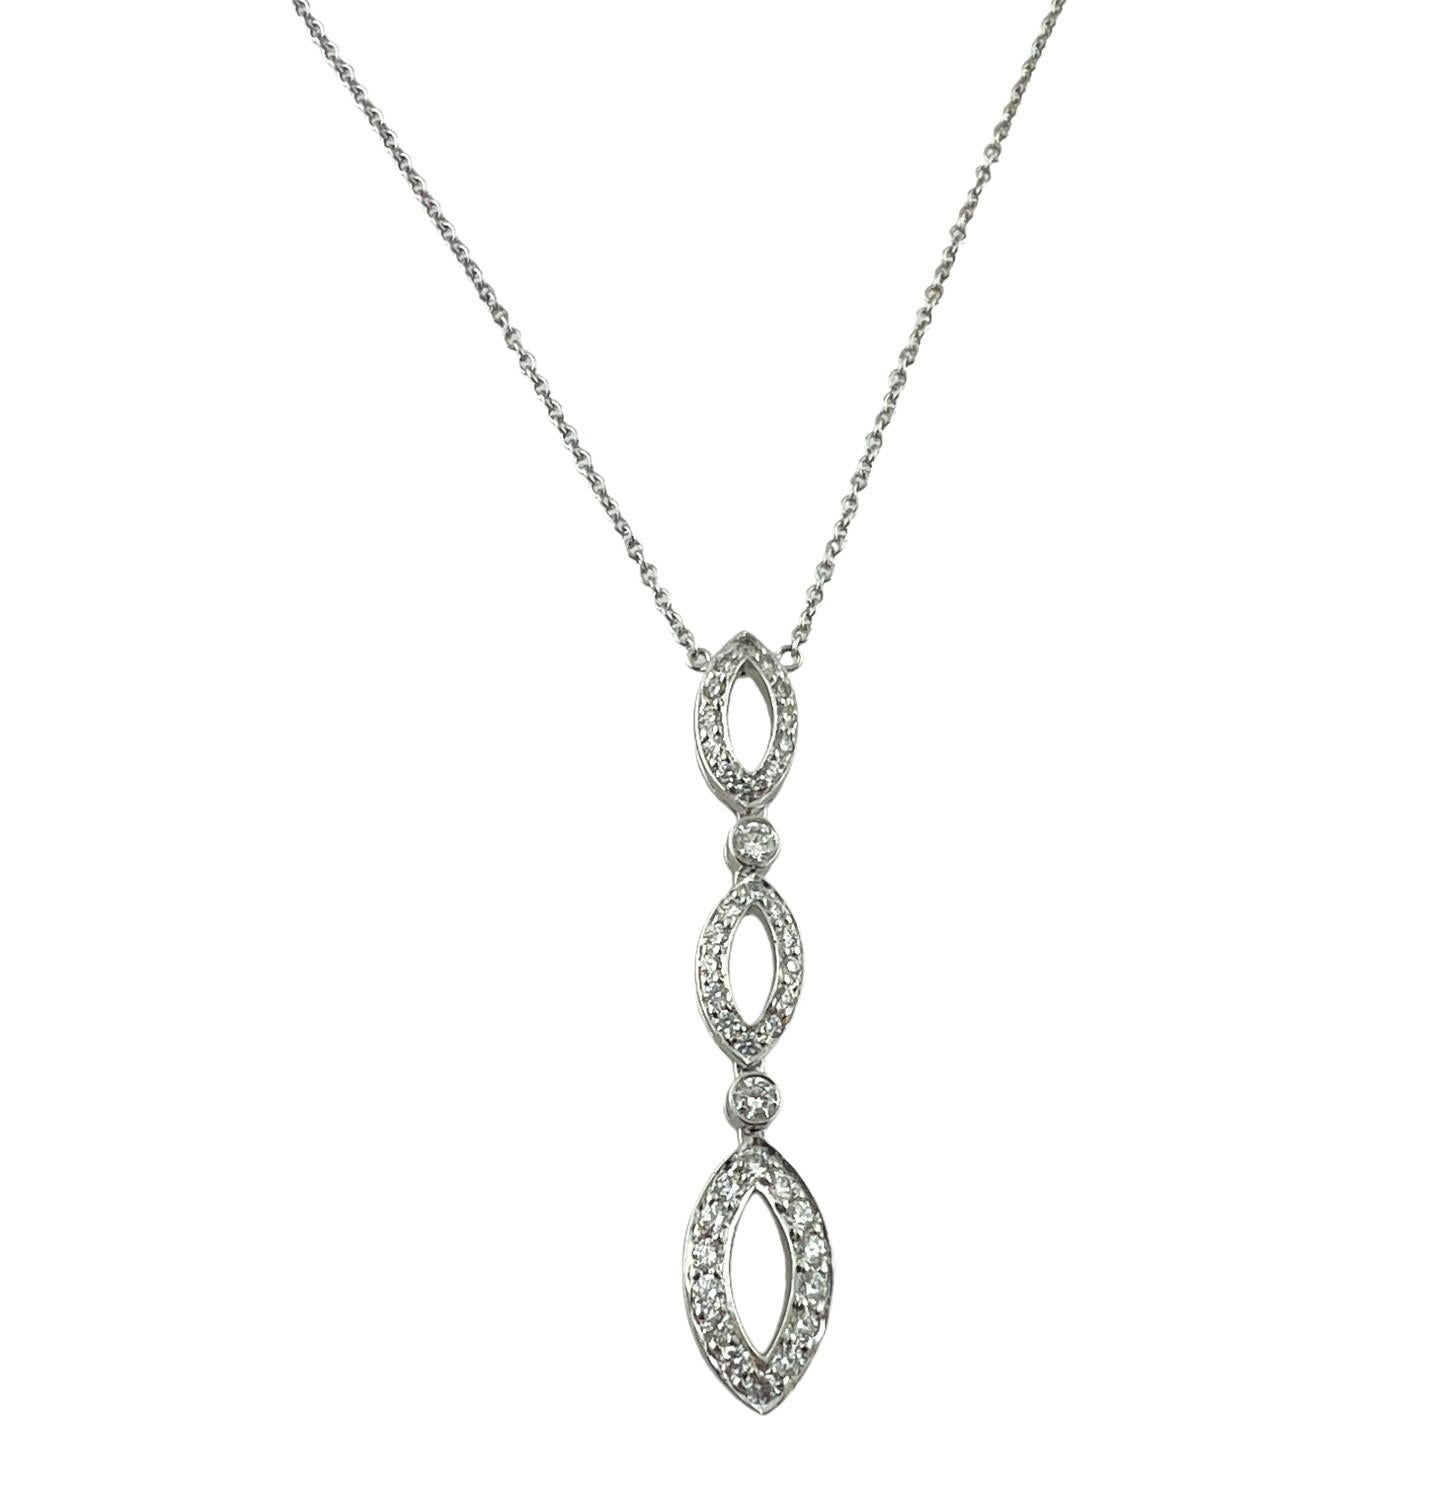 Tiffany & Co. Platinum Diamond Swing Drop Necklace

This beautiful Tiffany & Co. drop necklace is set in platinum and is a retired piece from the Tiffany Swing collection.

3 flexible drop stations are set with approx. .56cts of diamonds 
Diamonds